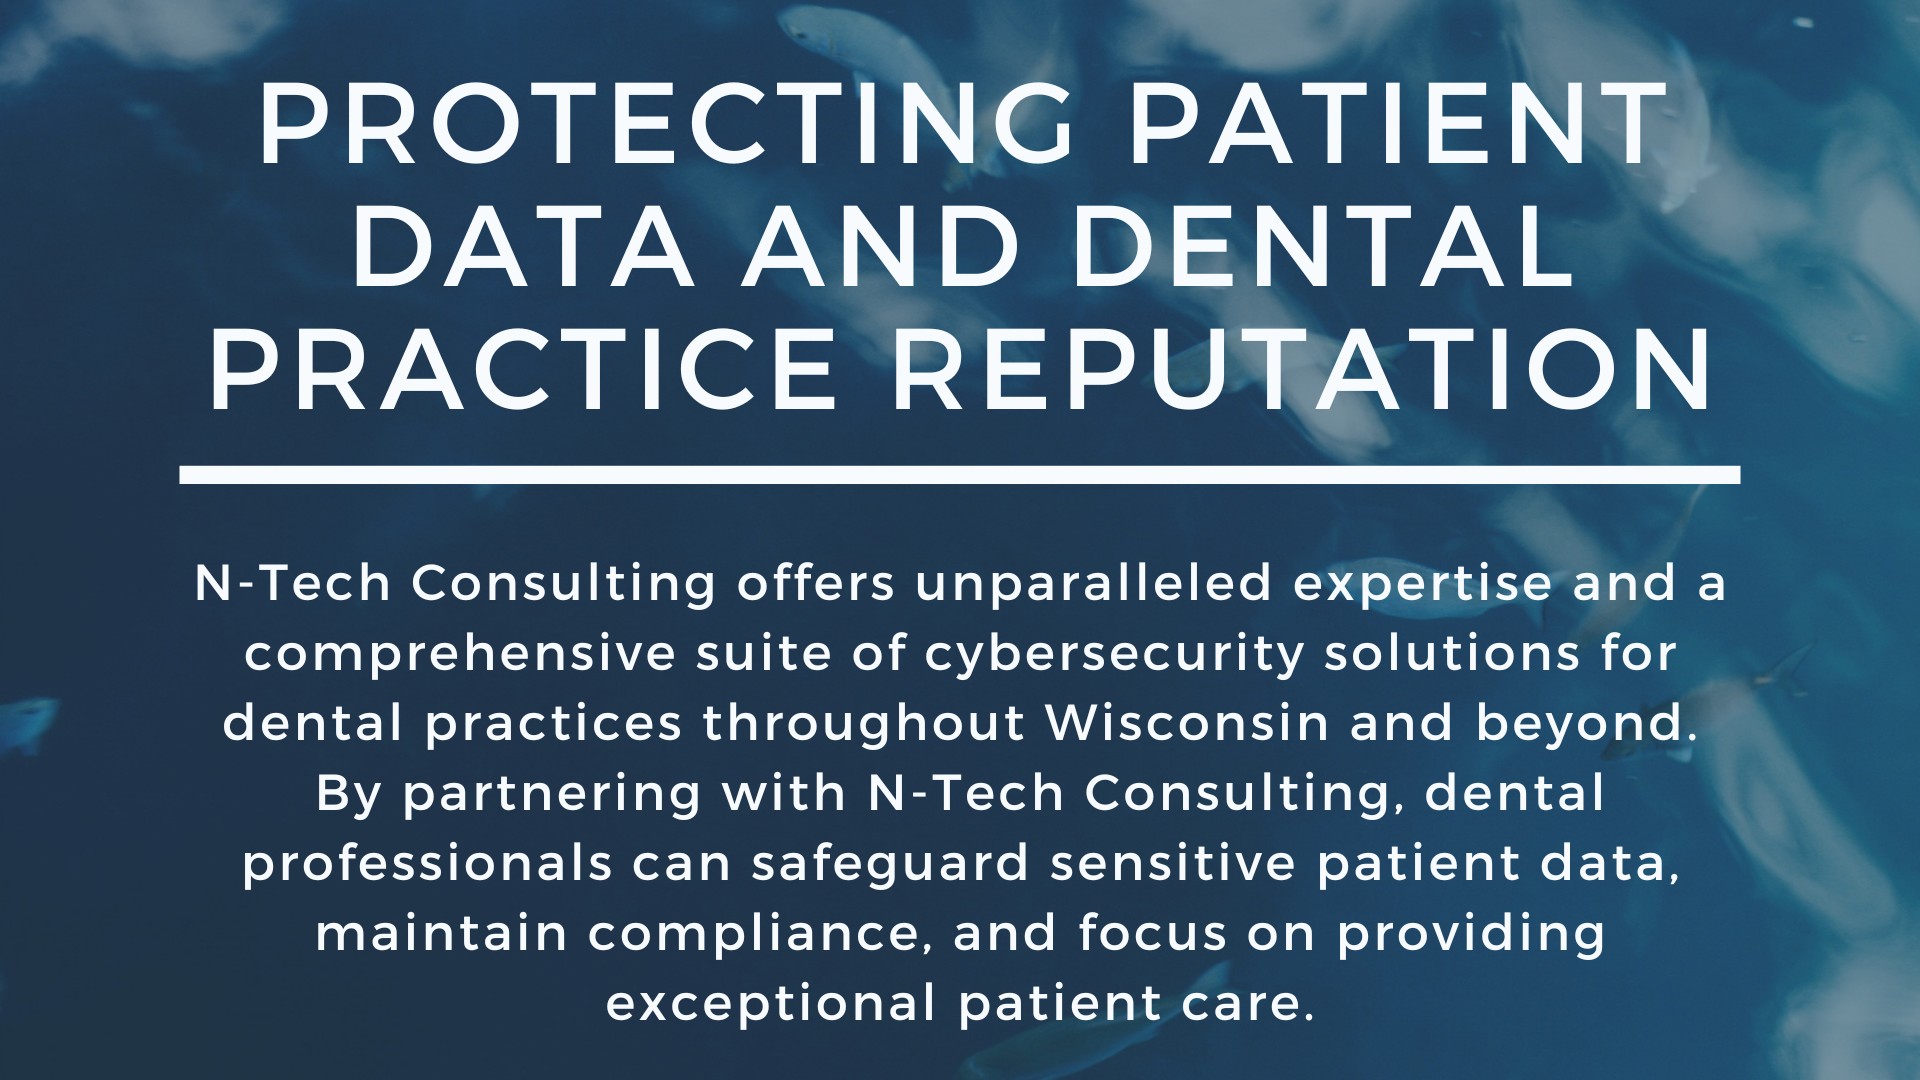 The Critical Role of Cybersecurity in Wisconsin's Dental Industry